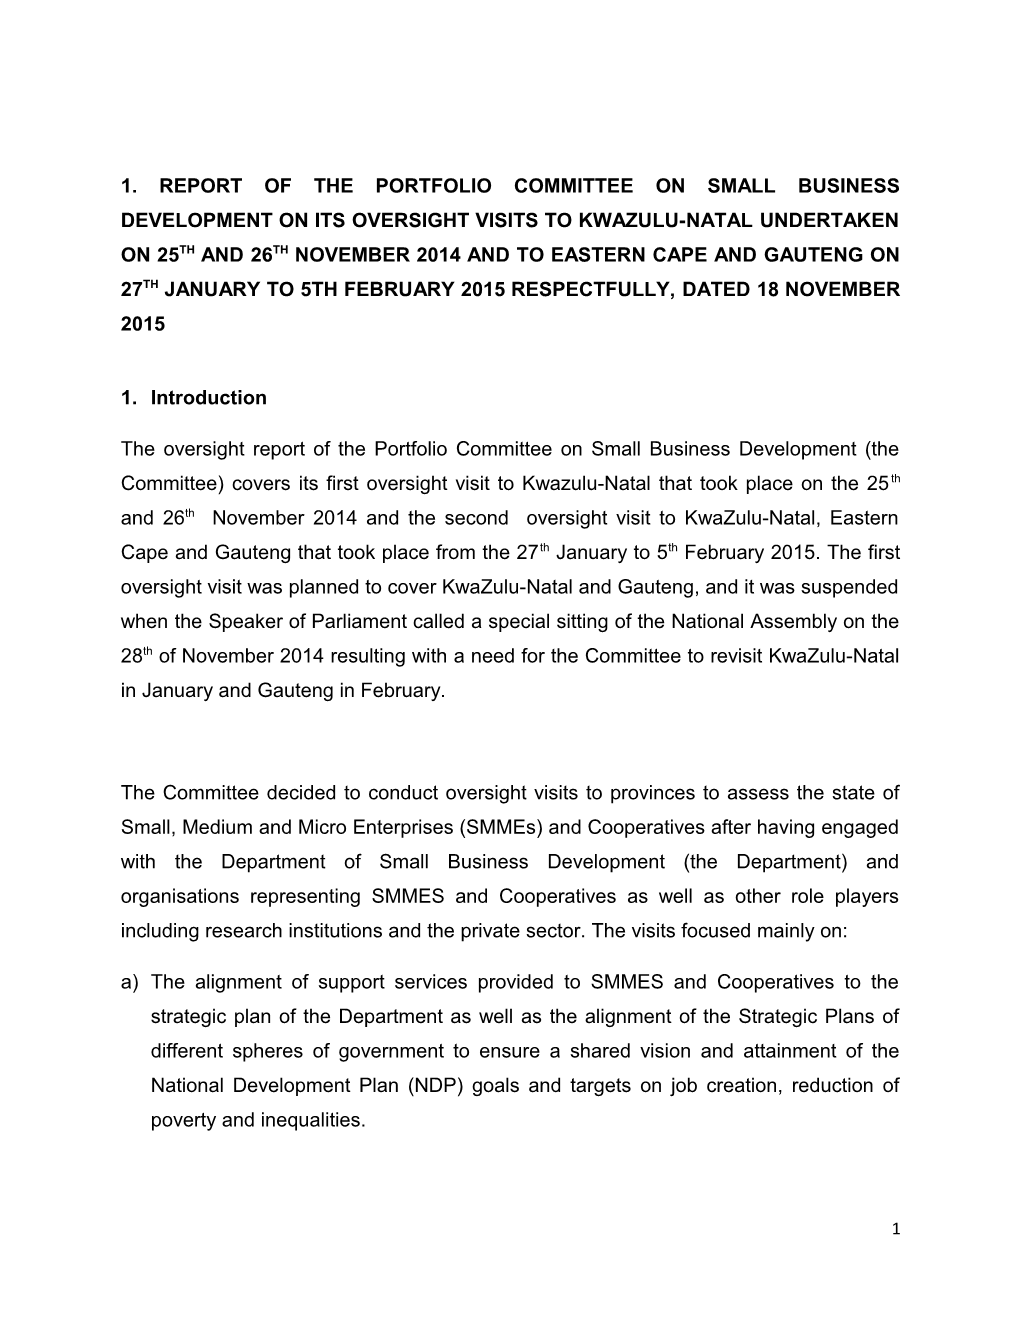 1. Report of the Portfolio Committee on Small Business Development on Its Oversight Visits